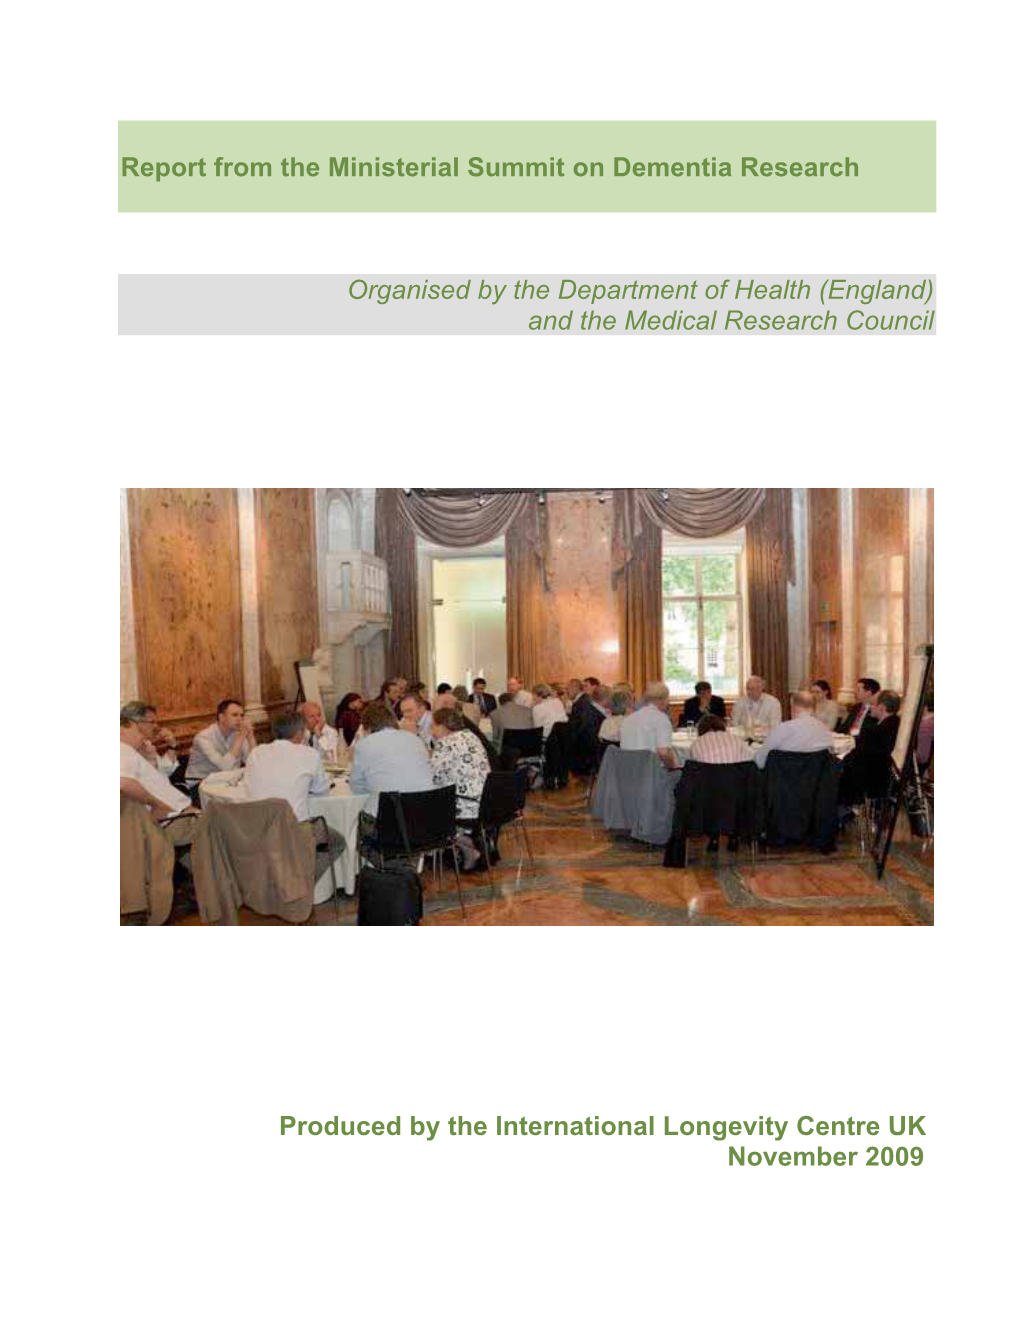 Report from the Ministerial Summit on Dementia Research